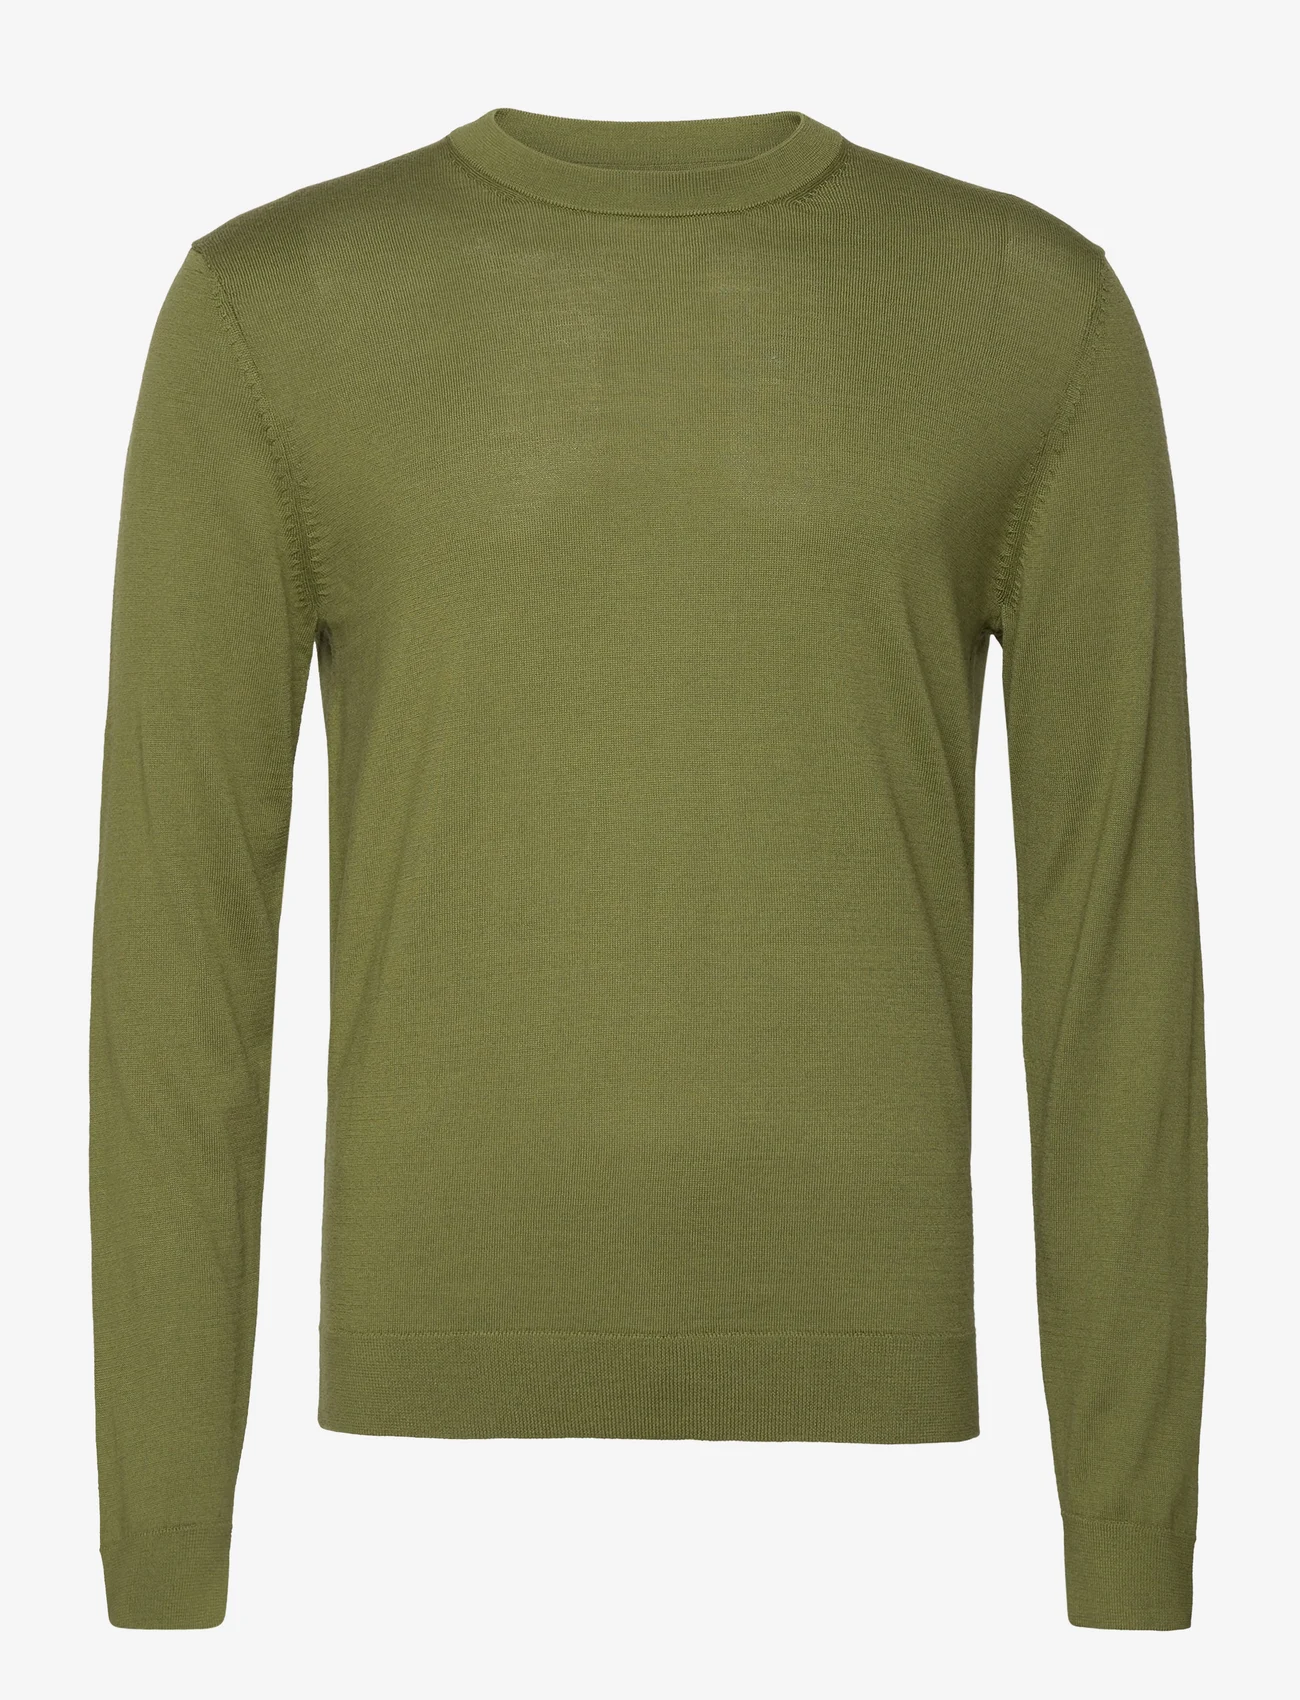 Selected Homme - SLHTOWN MERINO COOLMAX KNIT CREW NOOS - basic knitwear - olive branch - 0